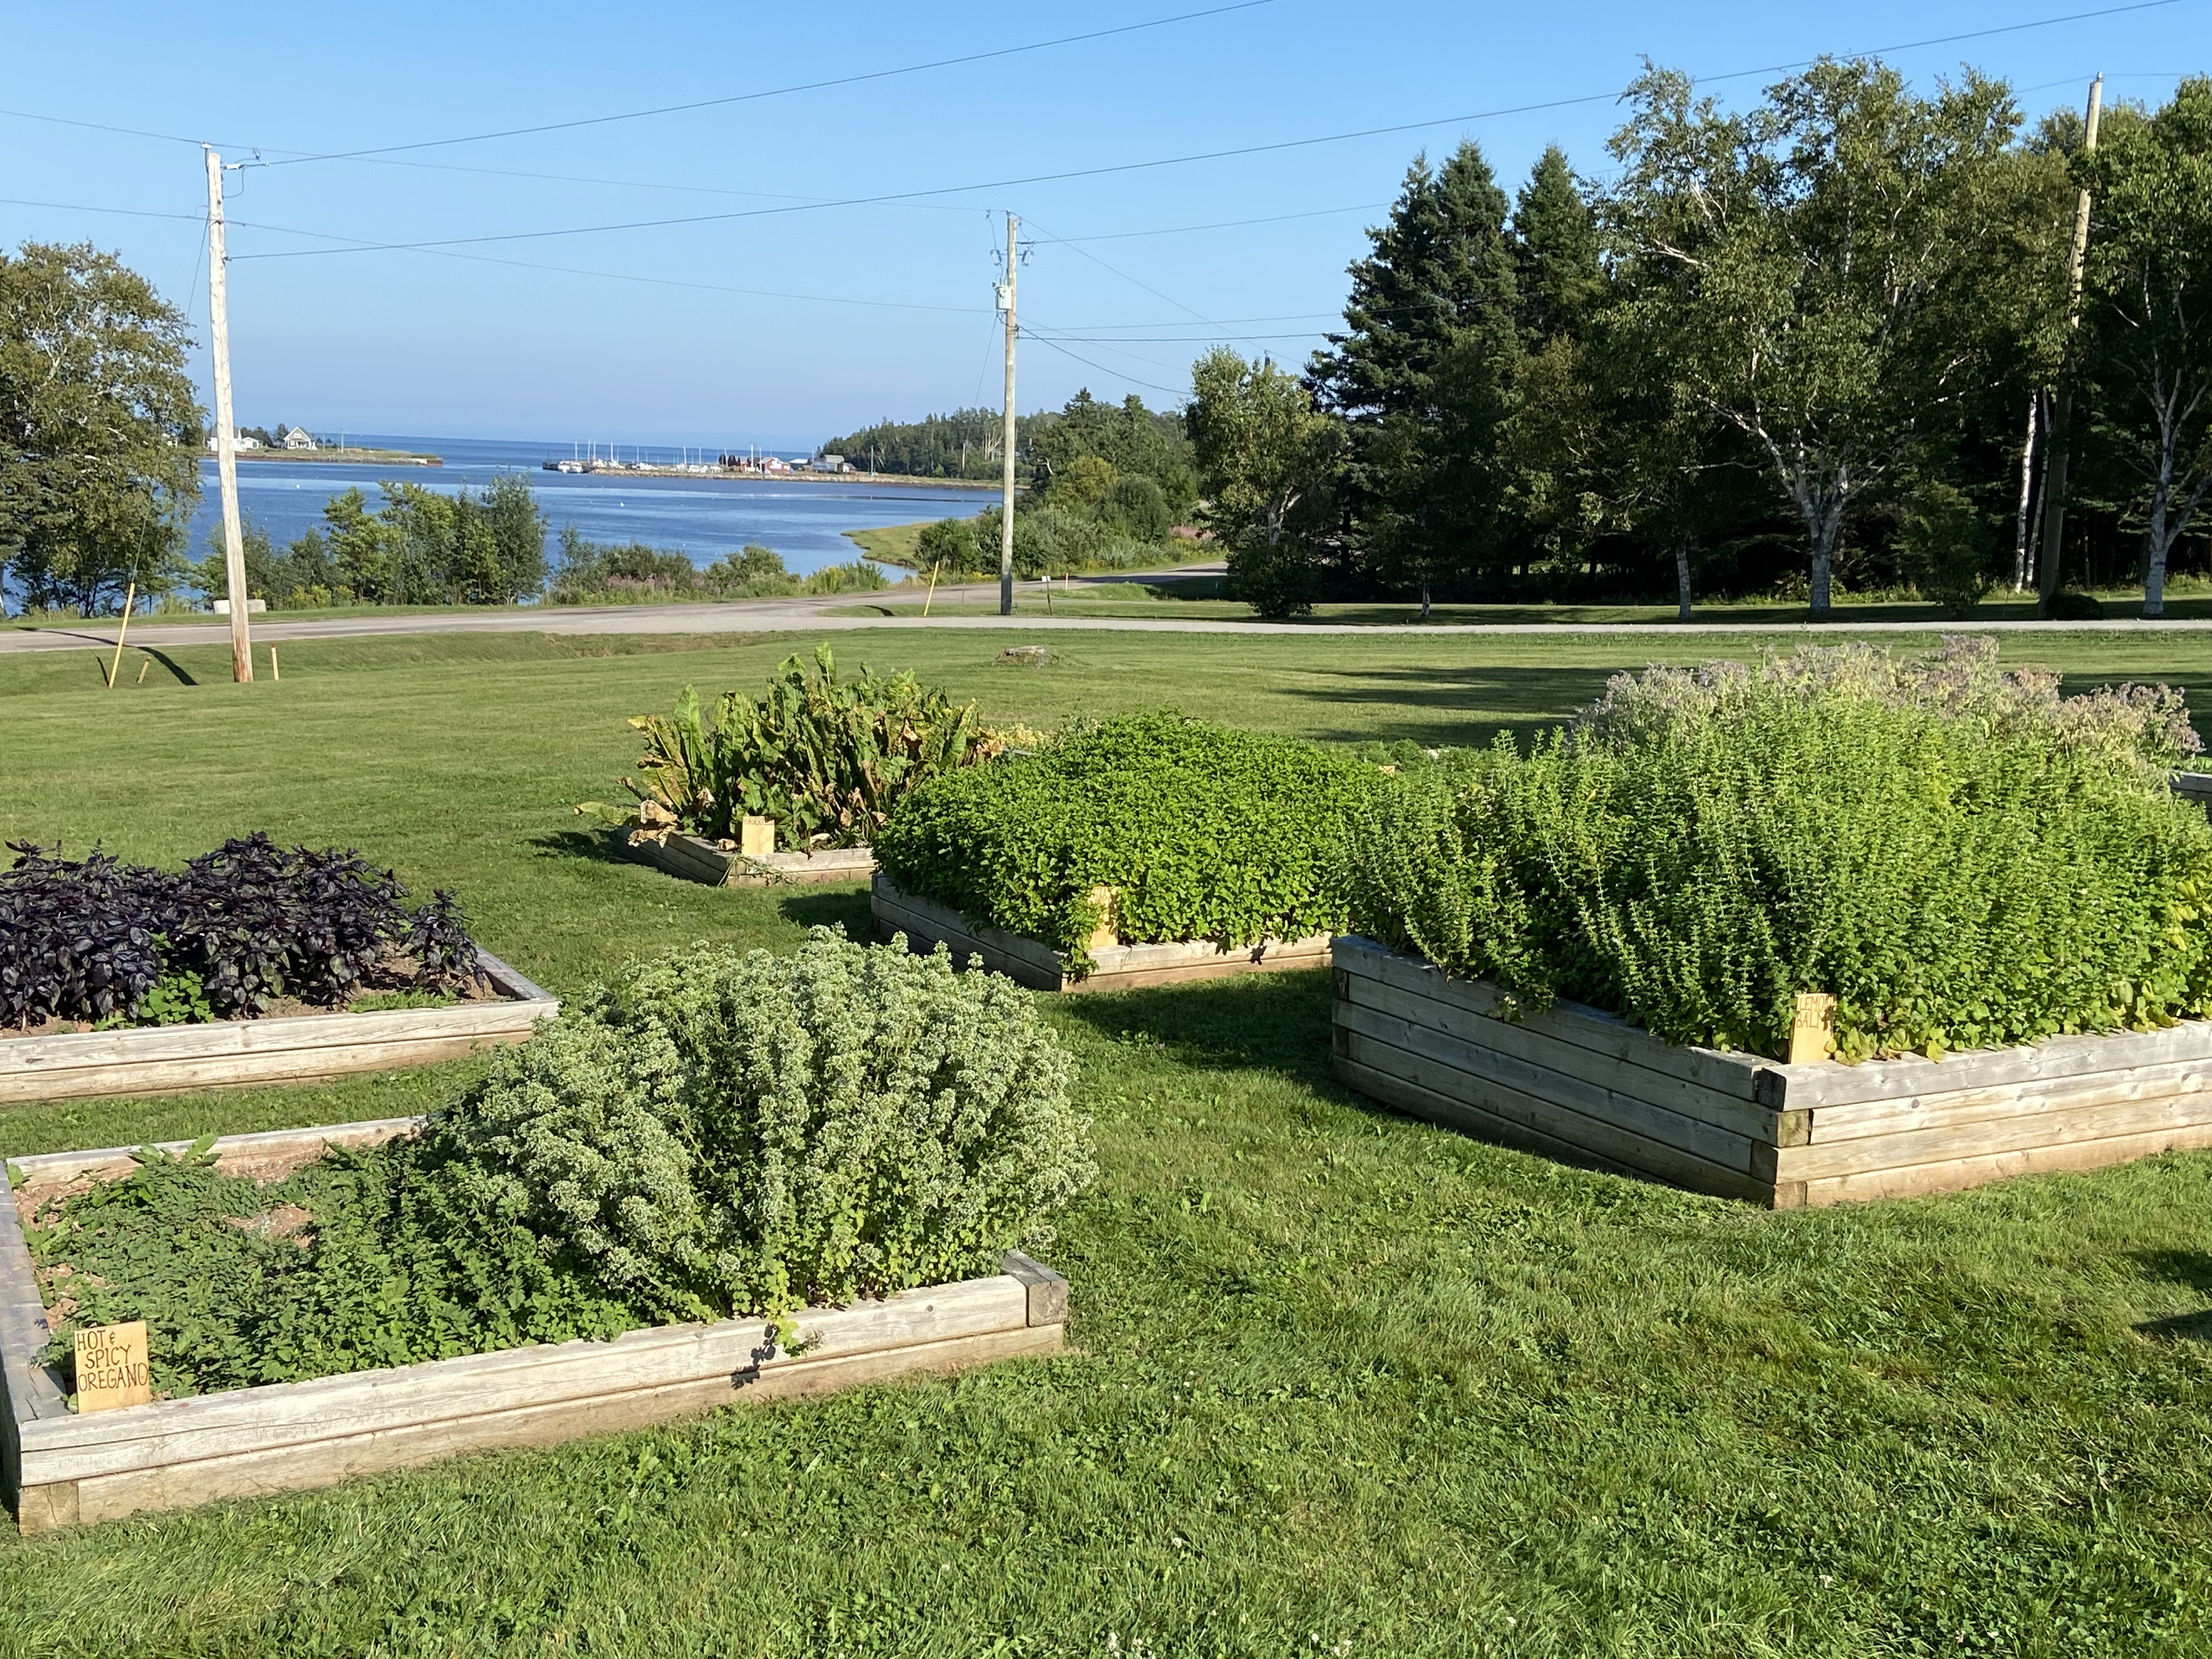 Raised beds containing herbs on the front lawn of the Inn at Bay Fortune on Prince Edward Island, Canada during the Farm Tour portion of the FireWorks Feast